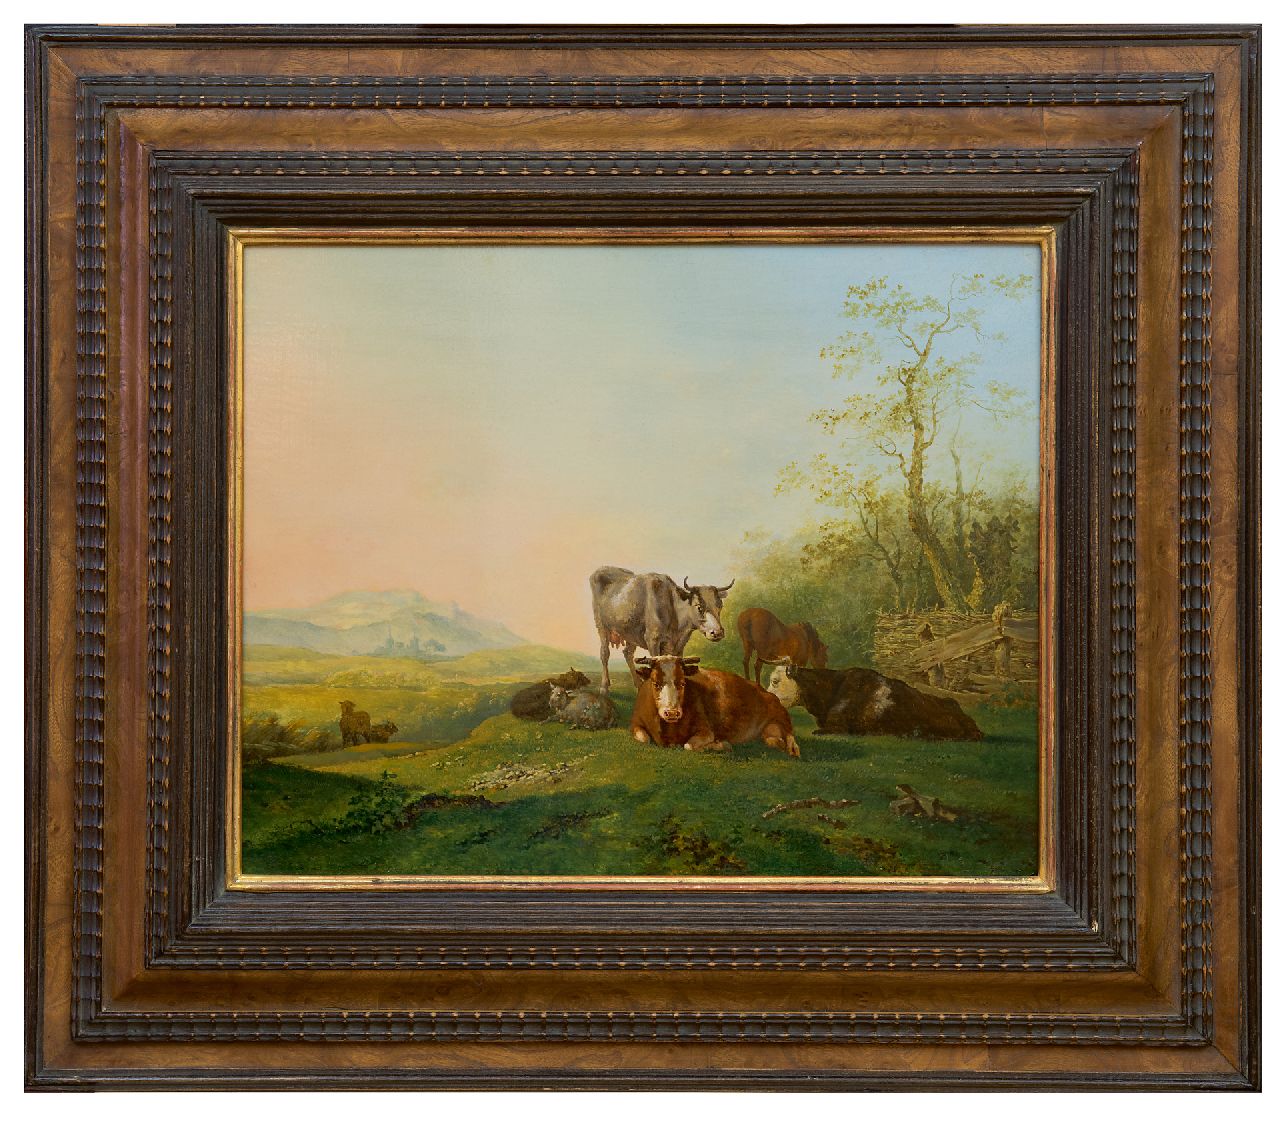 Straaten B. van | Bruno van Straaten | Paintings offered for sale | Cows and sheep near a fence, oil on panel 29.7 x 36.9 cm, signed l.r.